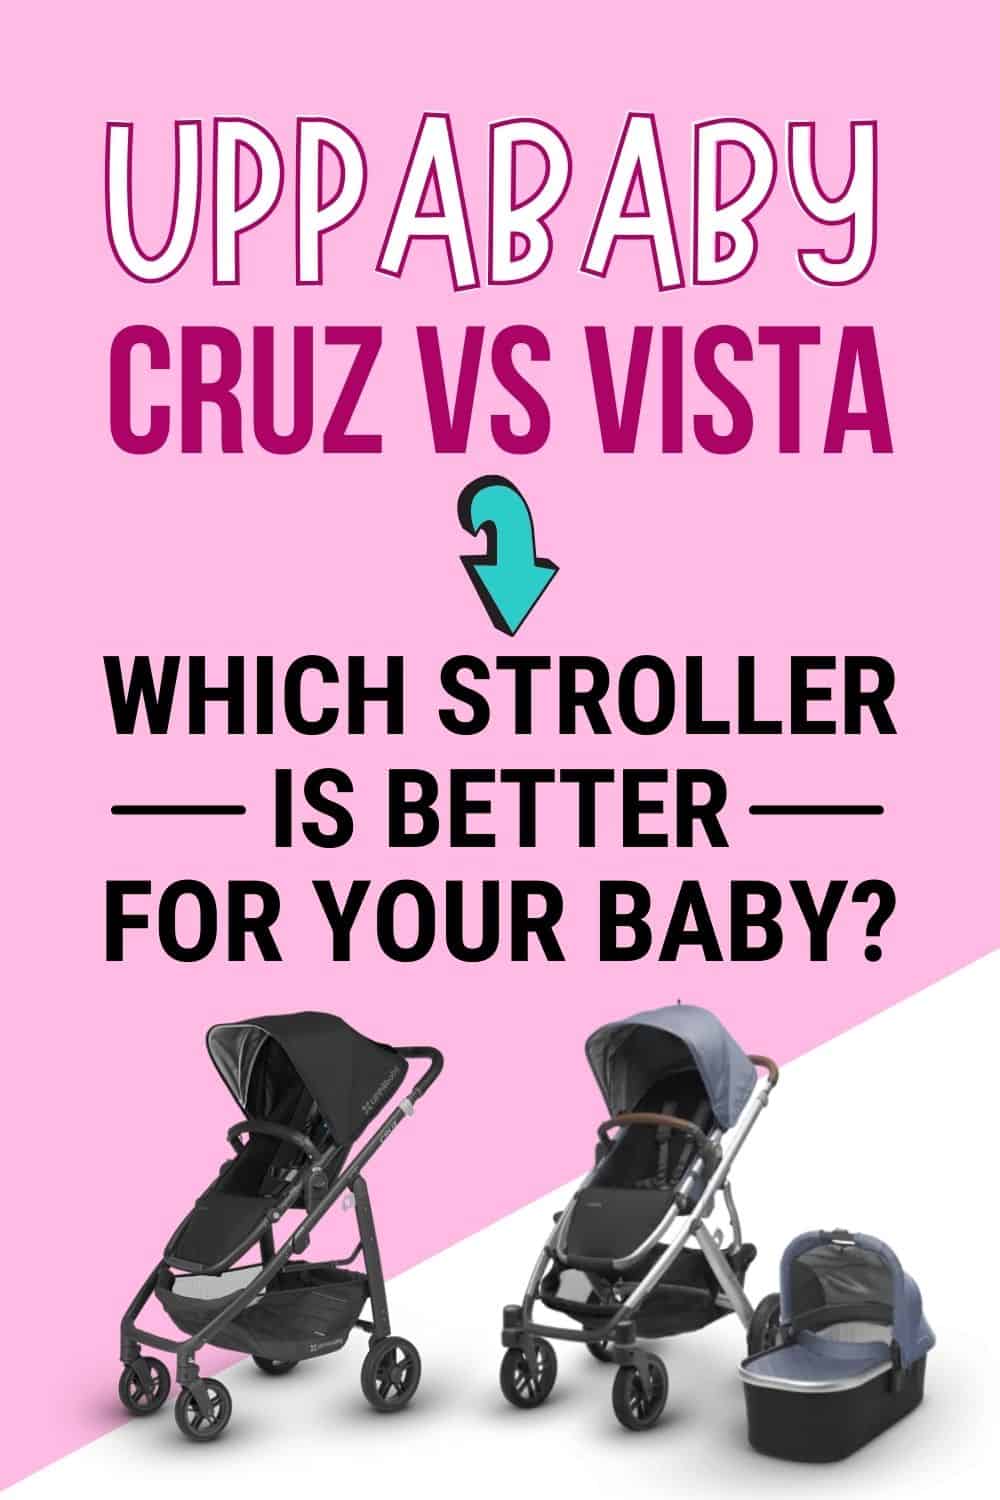 Uppababy Cruz Vs Vista – Which Stroller Is Better For Your Baby Pinterest